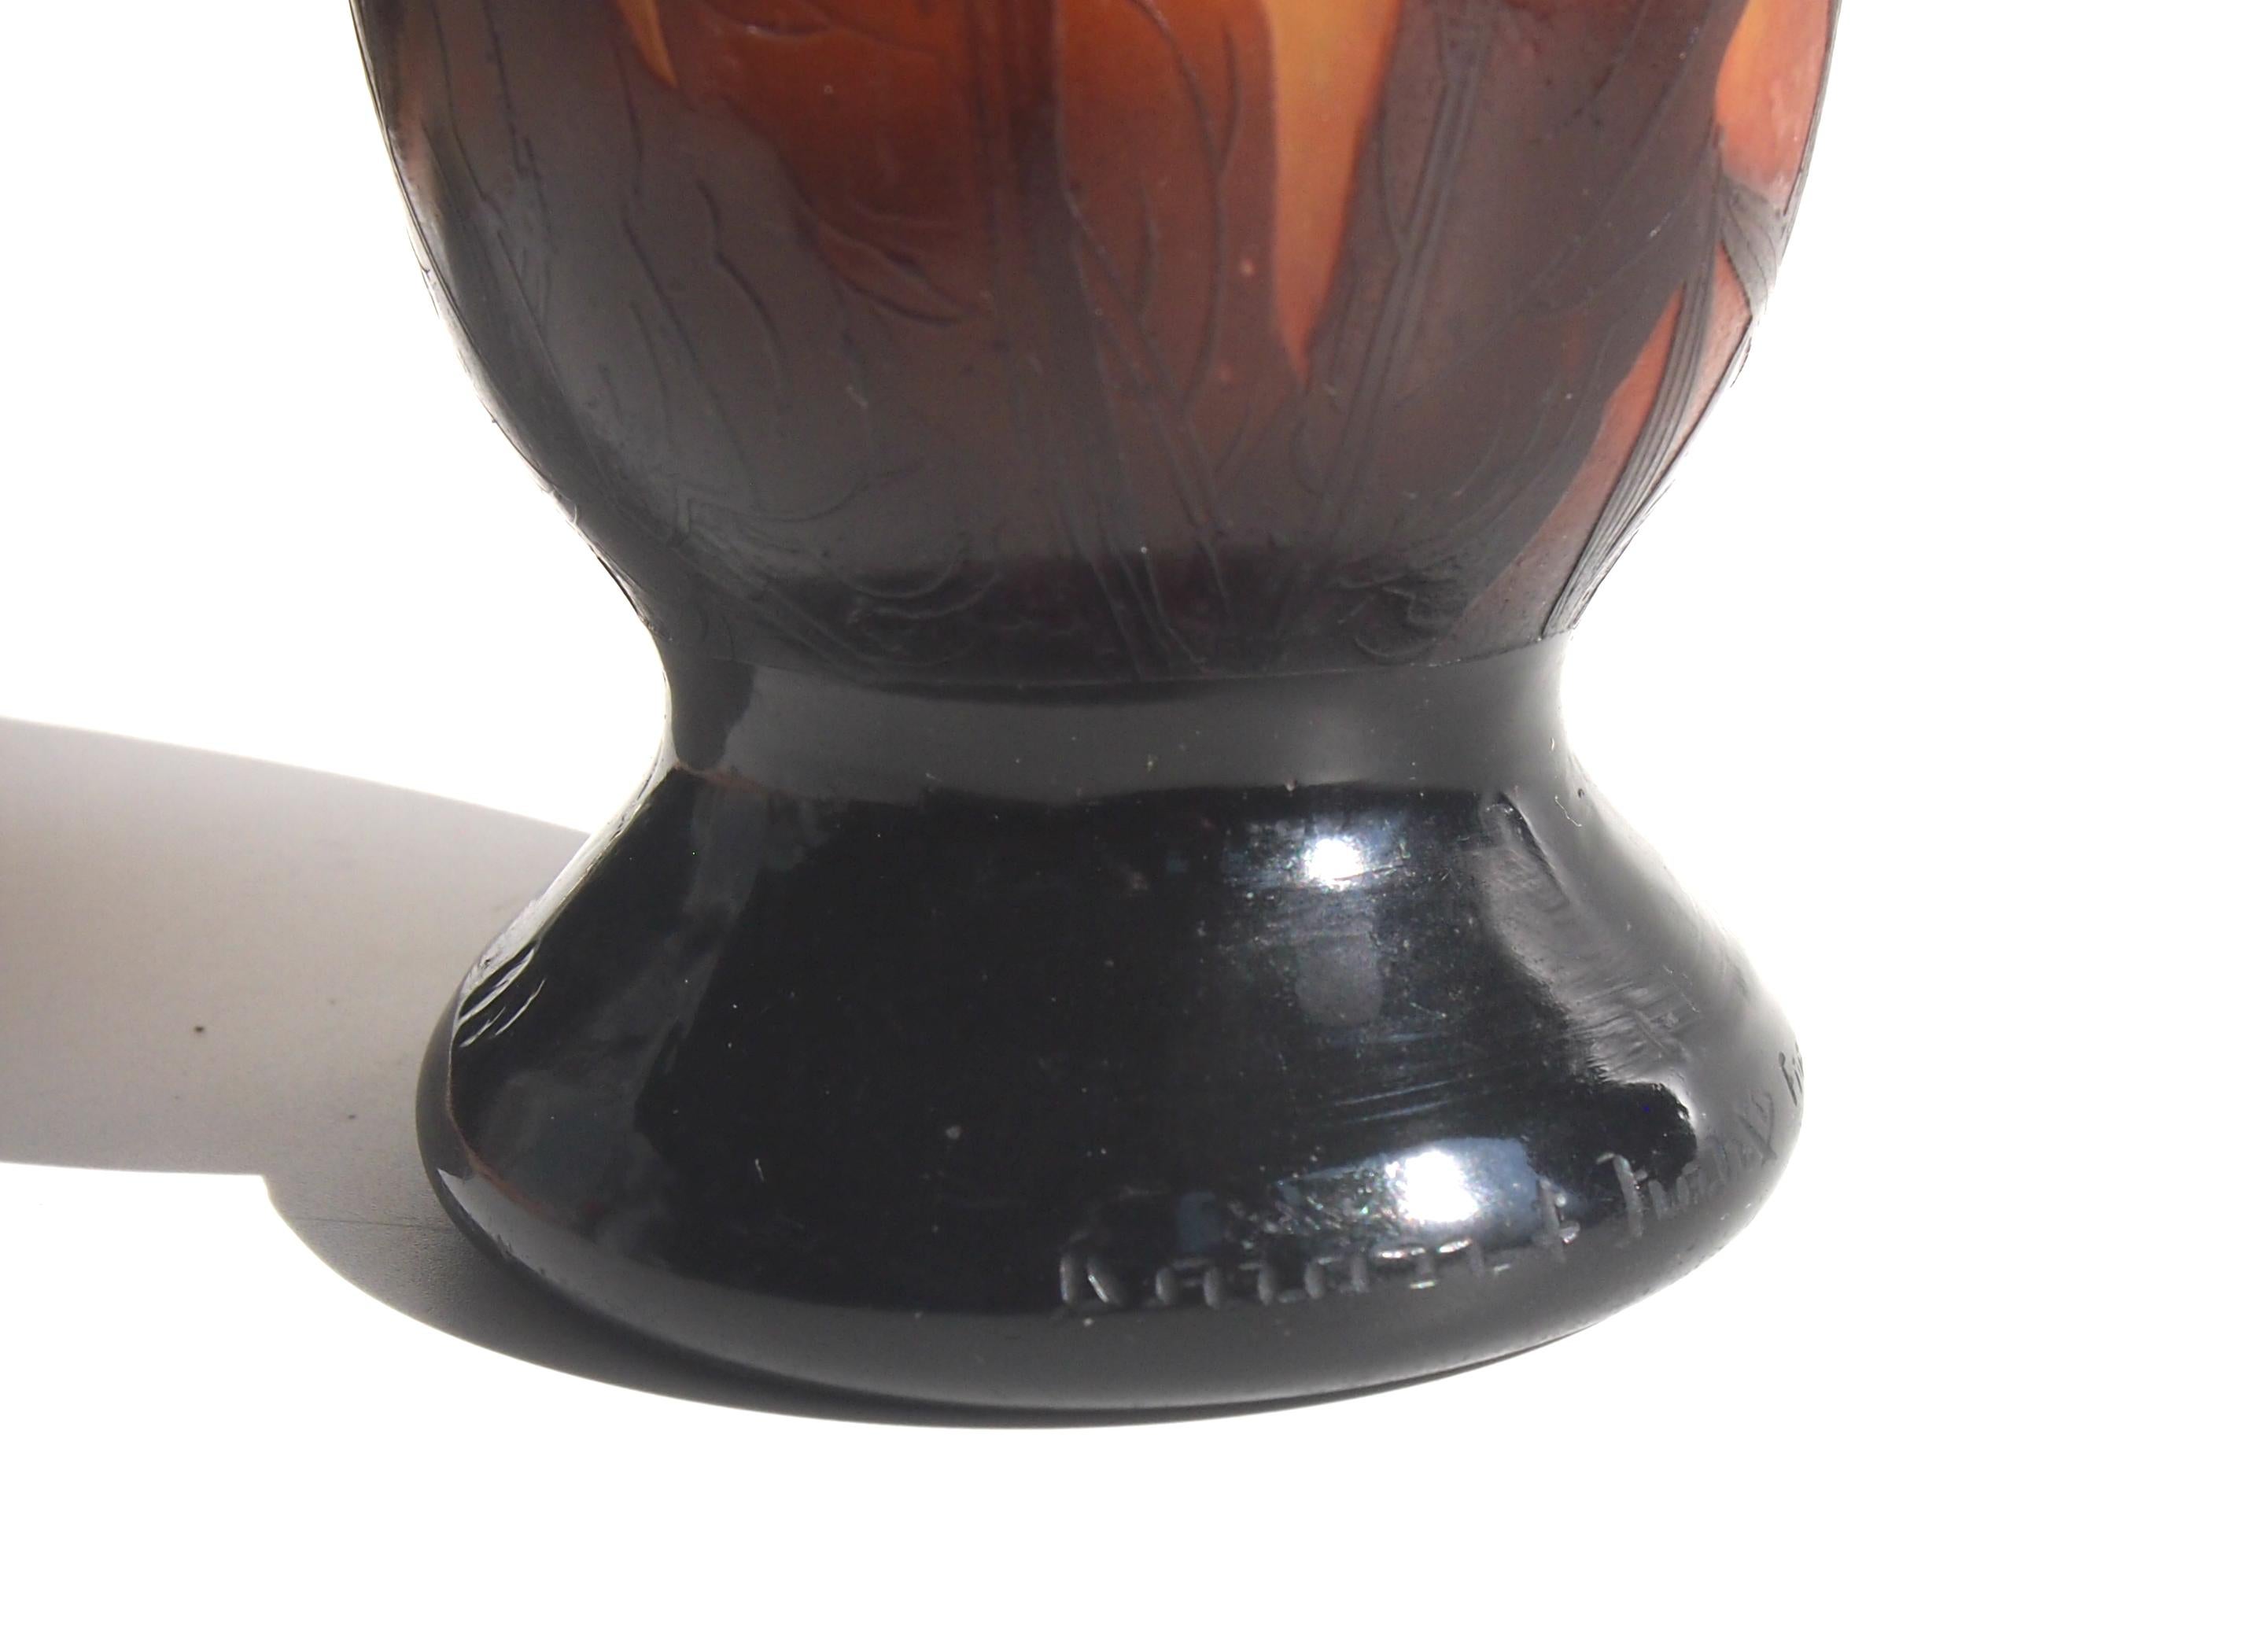 Art Glass French Art Nouveau Daum Cameo and Wheel Carved Glass Nicotiana Vase c1900 For Sale